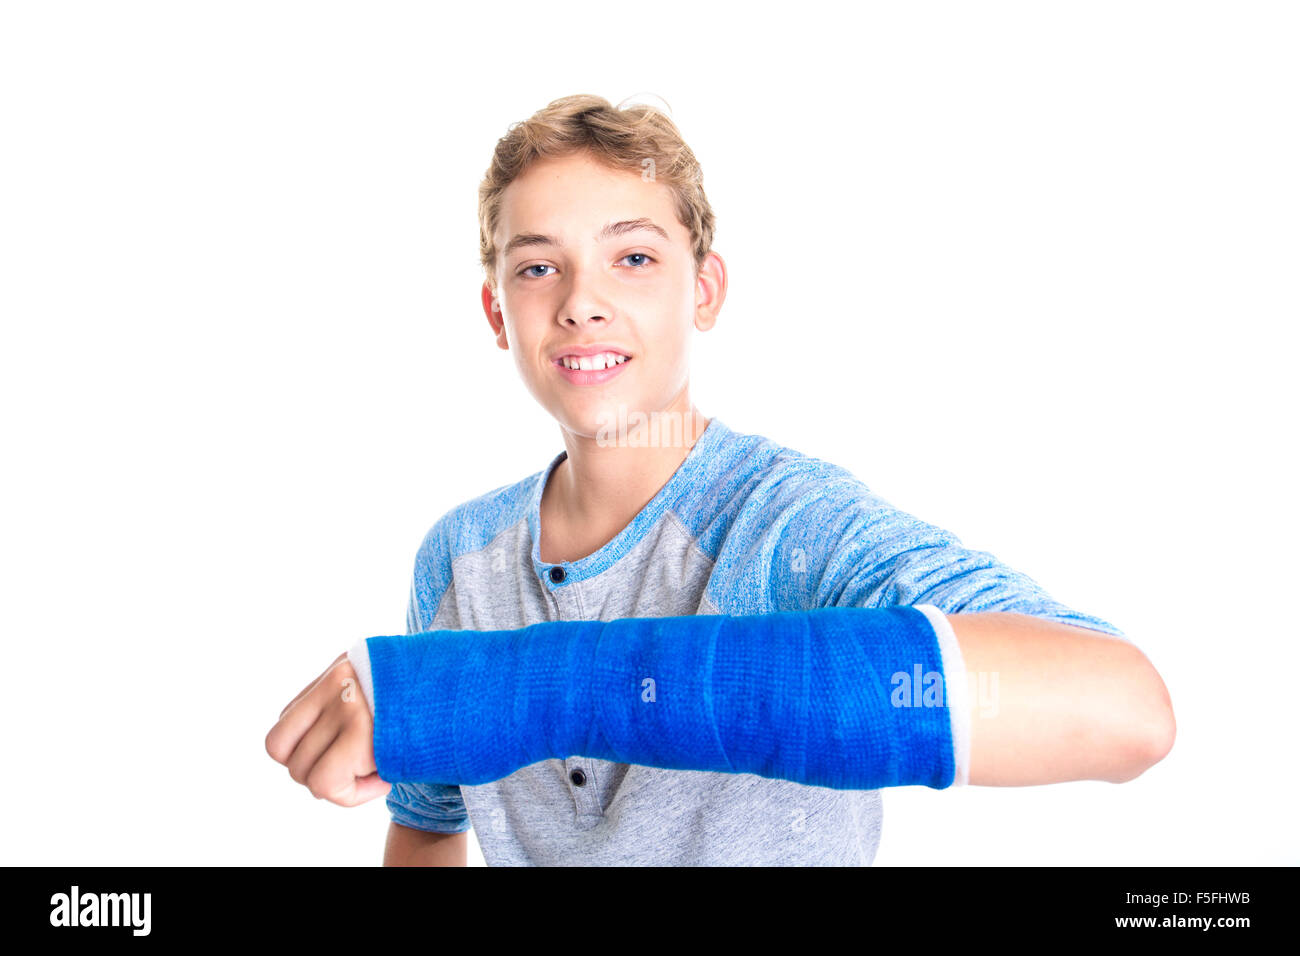 Blue cast on hand and arm isolated on white background Stock Photo - Alamy